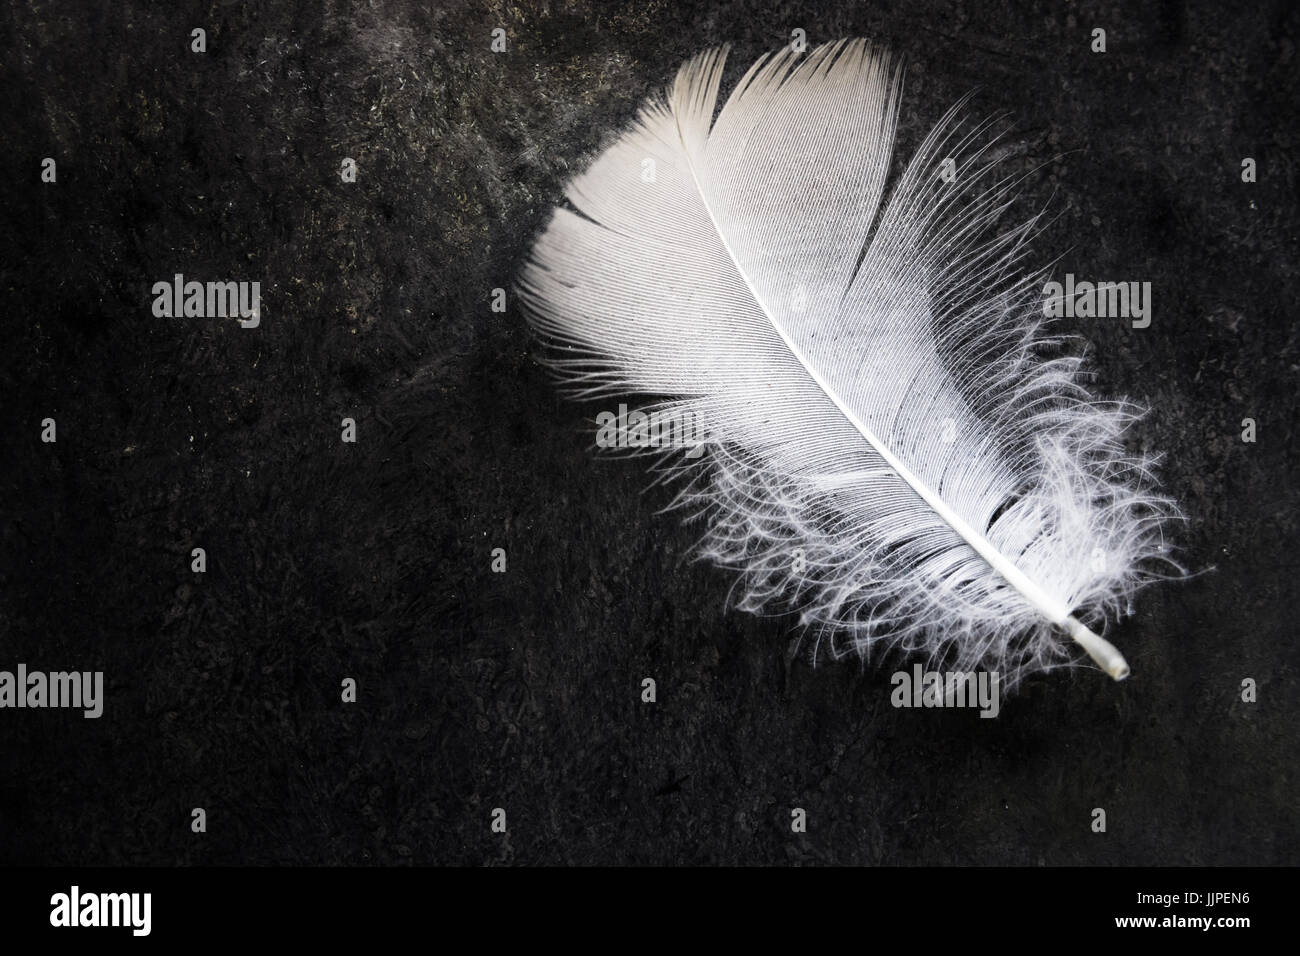 White clean delicate bird feather on black concrete stone background, contrast, purity, equilibrium, top view Stock Photo